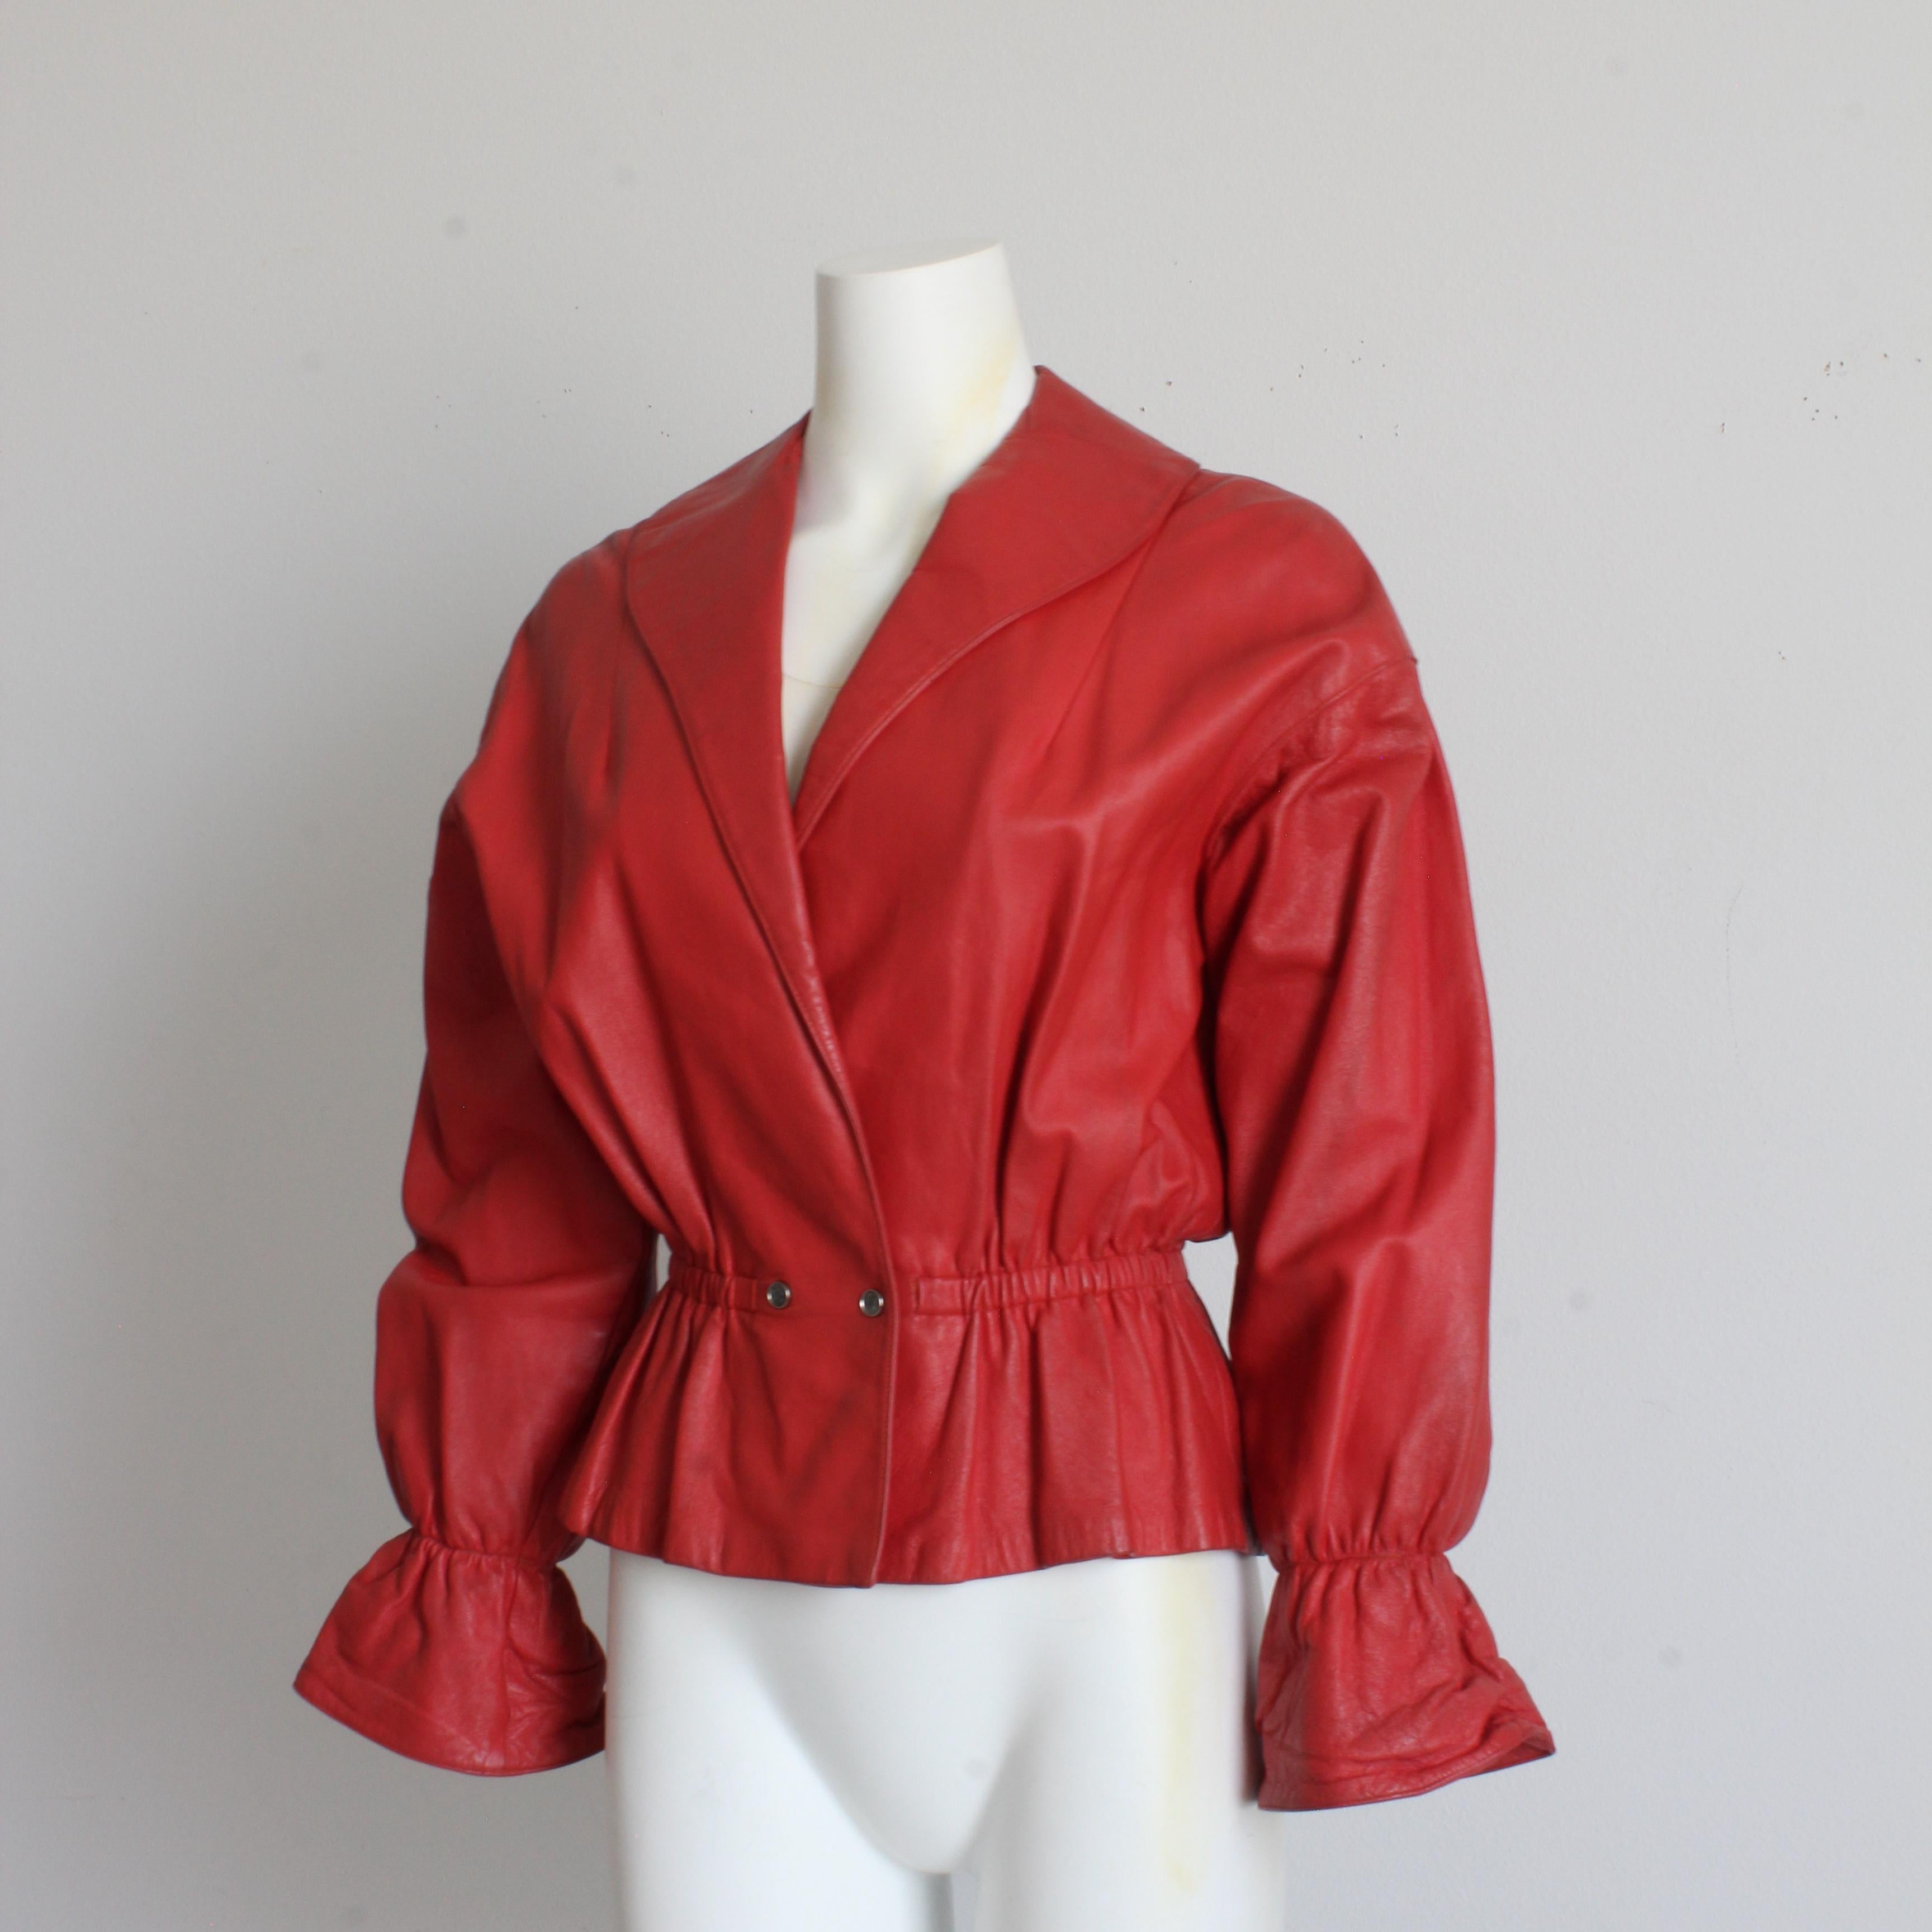 Bonnie Cashin for Sills Red Leather Jacket with Peplum Waist Rare Vintage 1960s  For Sale 3